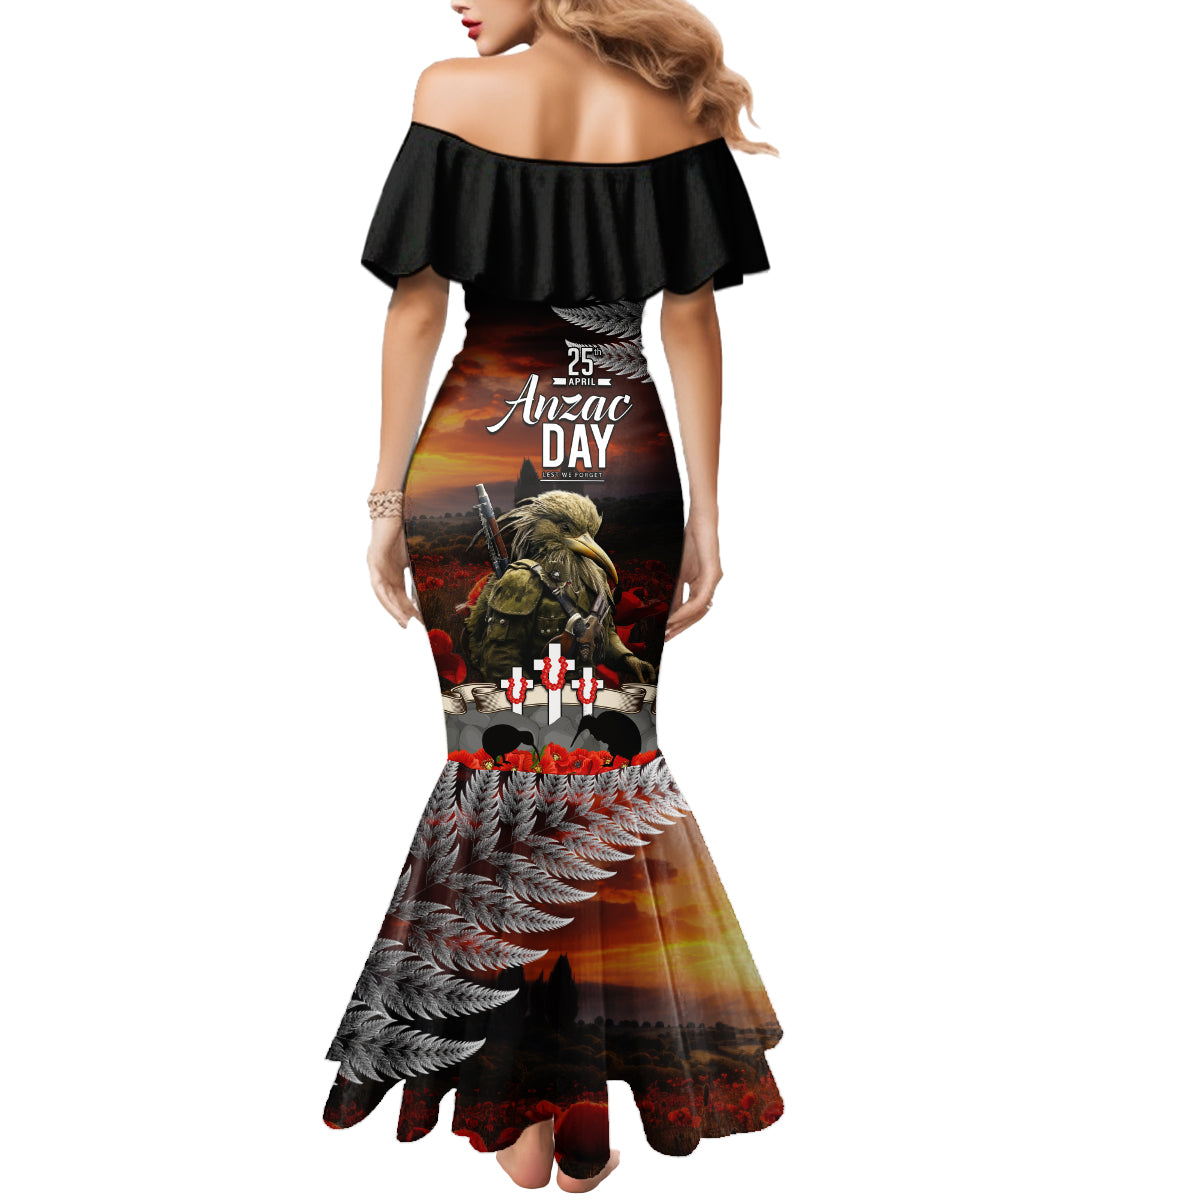 New Zealand ANZAC Day Mermaid Dress The Ode of Remembrance and Silver Fern